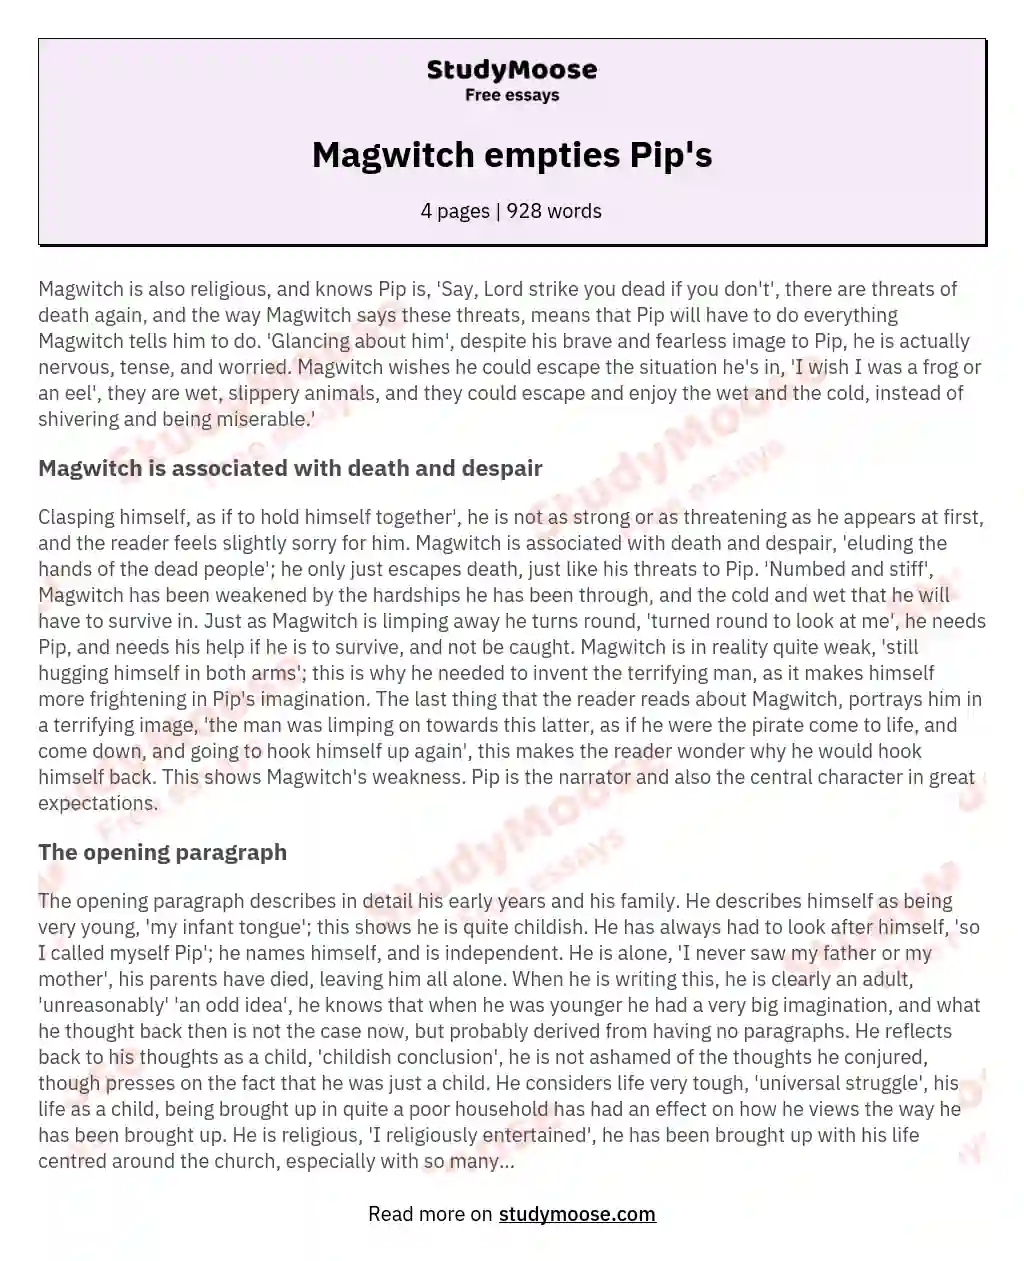 Magwitch empties Pip's